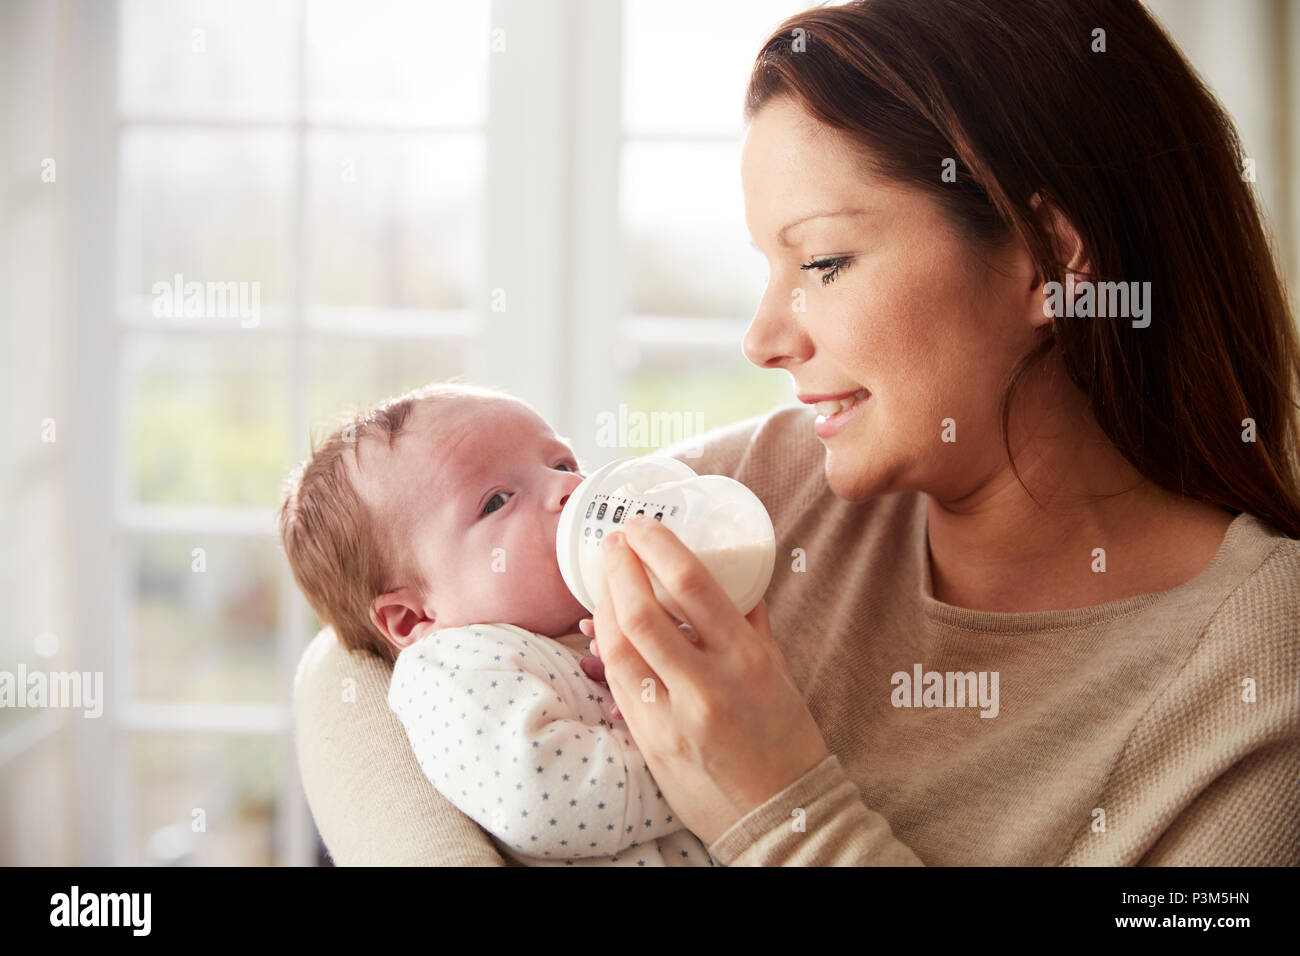 Mother Feeding Newborn Baby From Bottle At Home Stock Photo